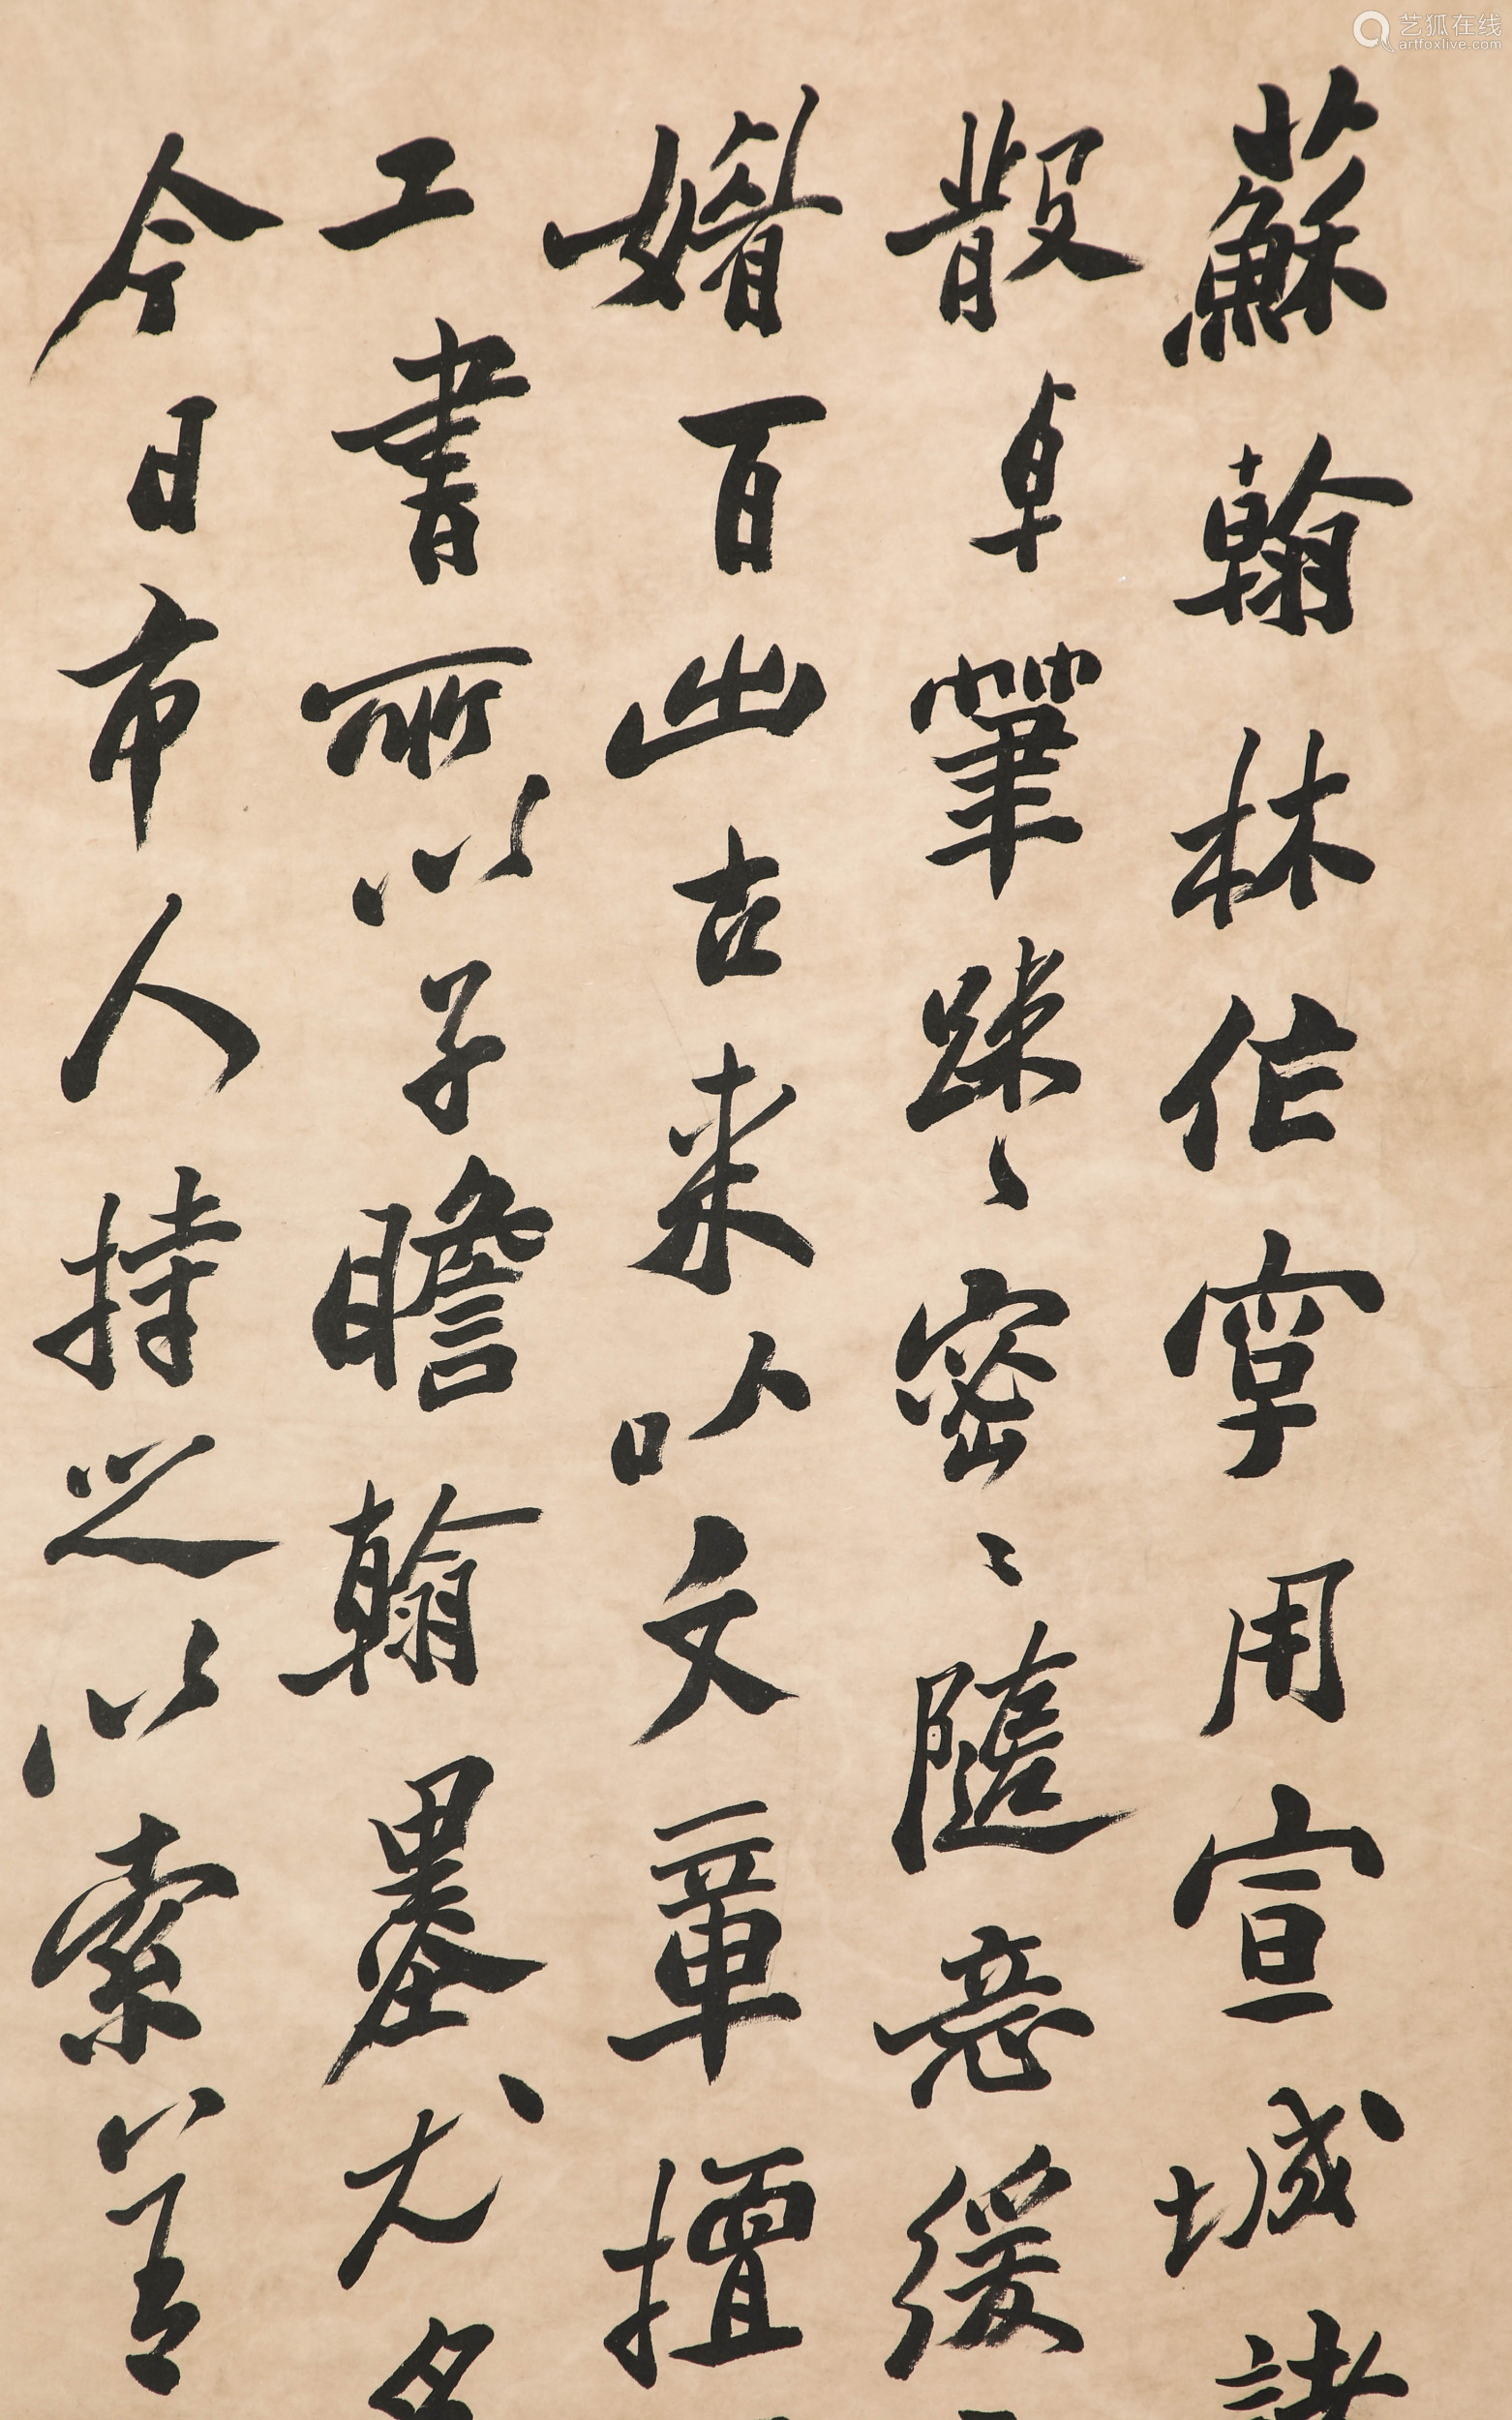 Chinese ink painting,
Zheng Banqiao's calligraphy